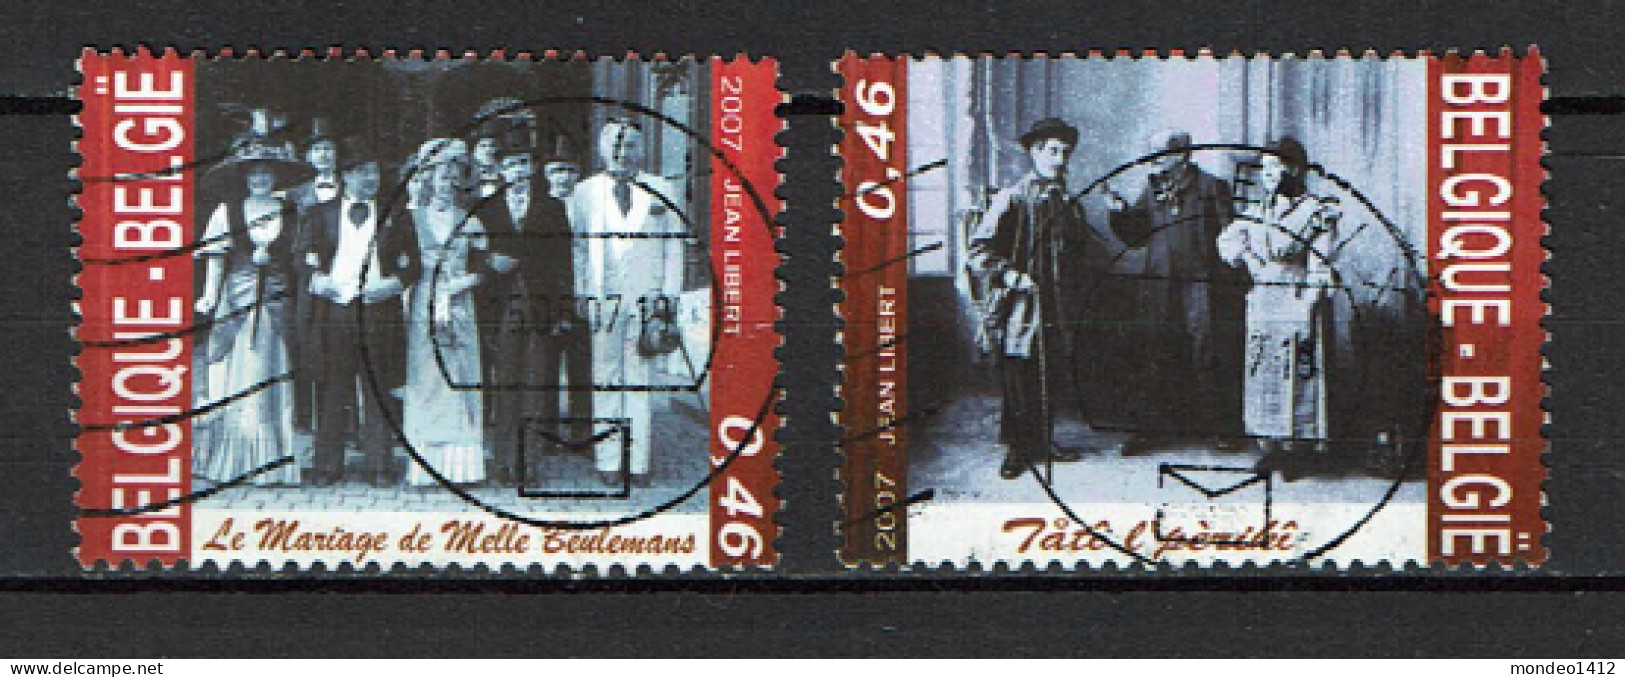 België OBP 3626 + 3628 - Volkstheater, Théâtre Populaire - Used Stamps